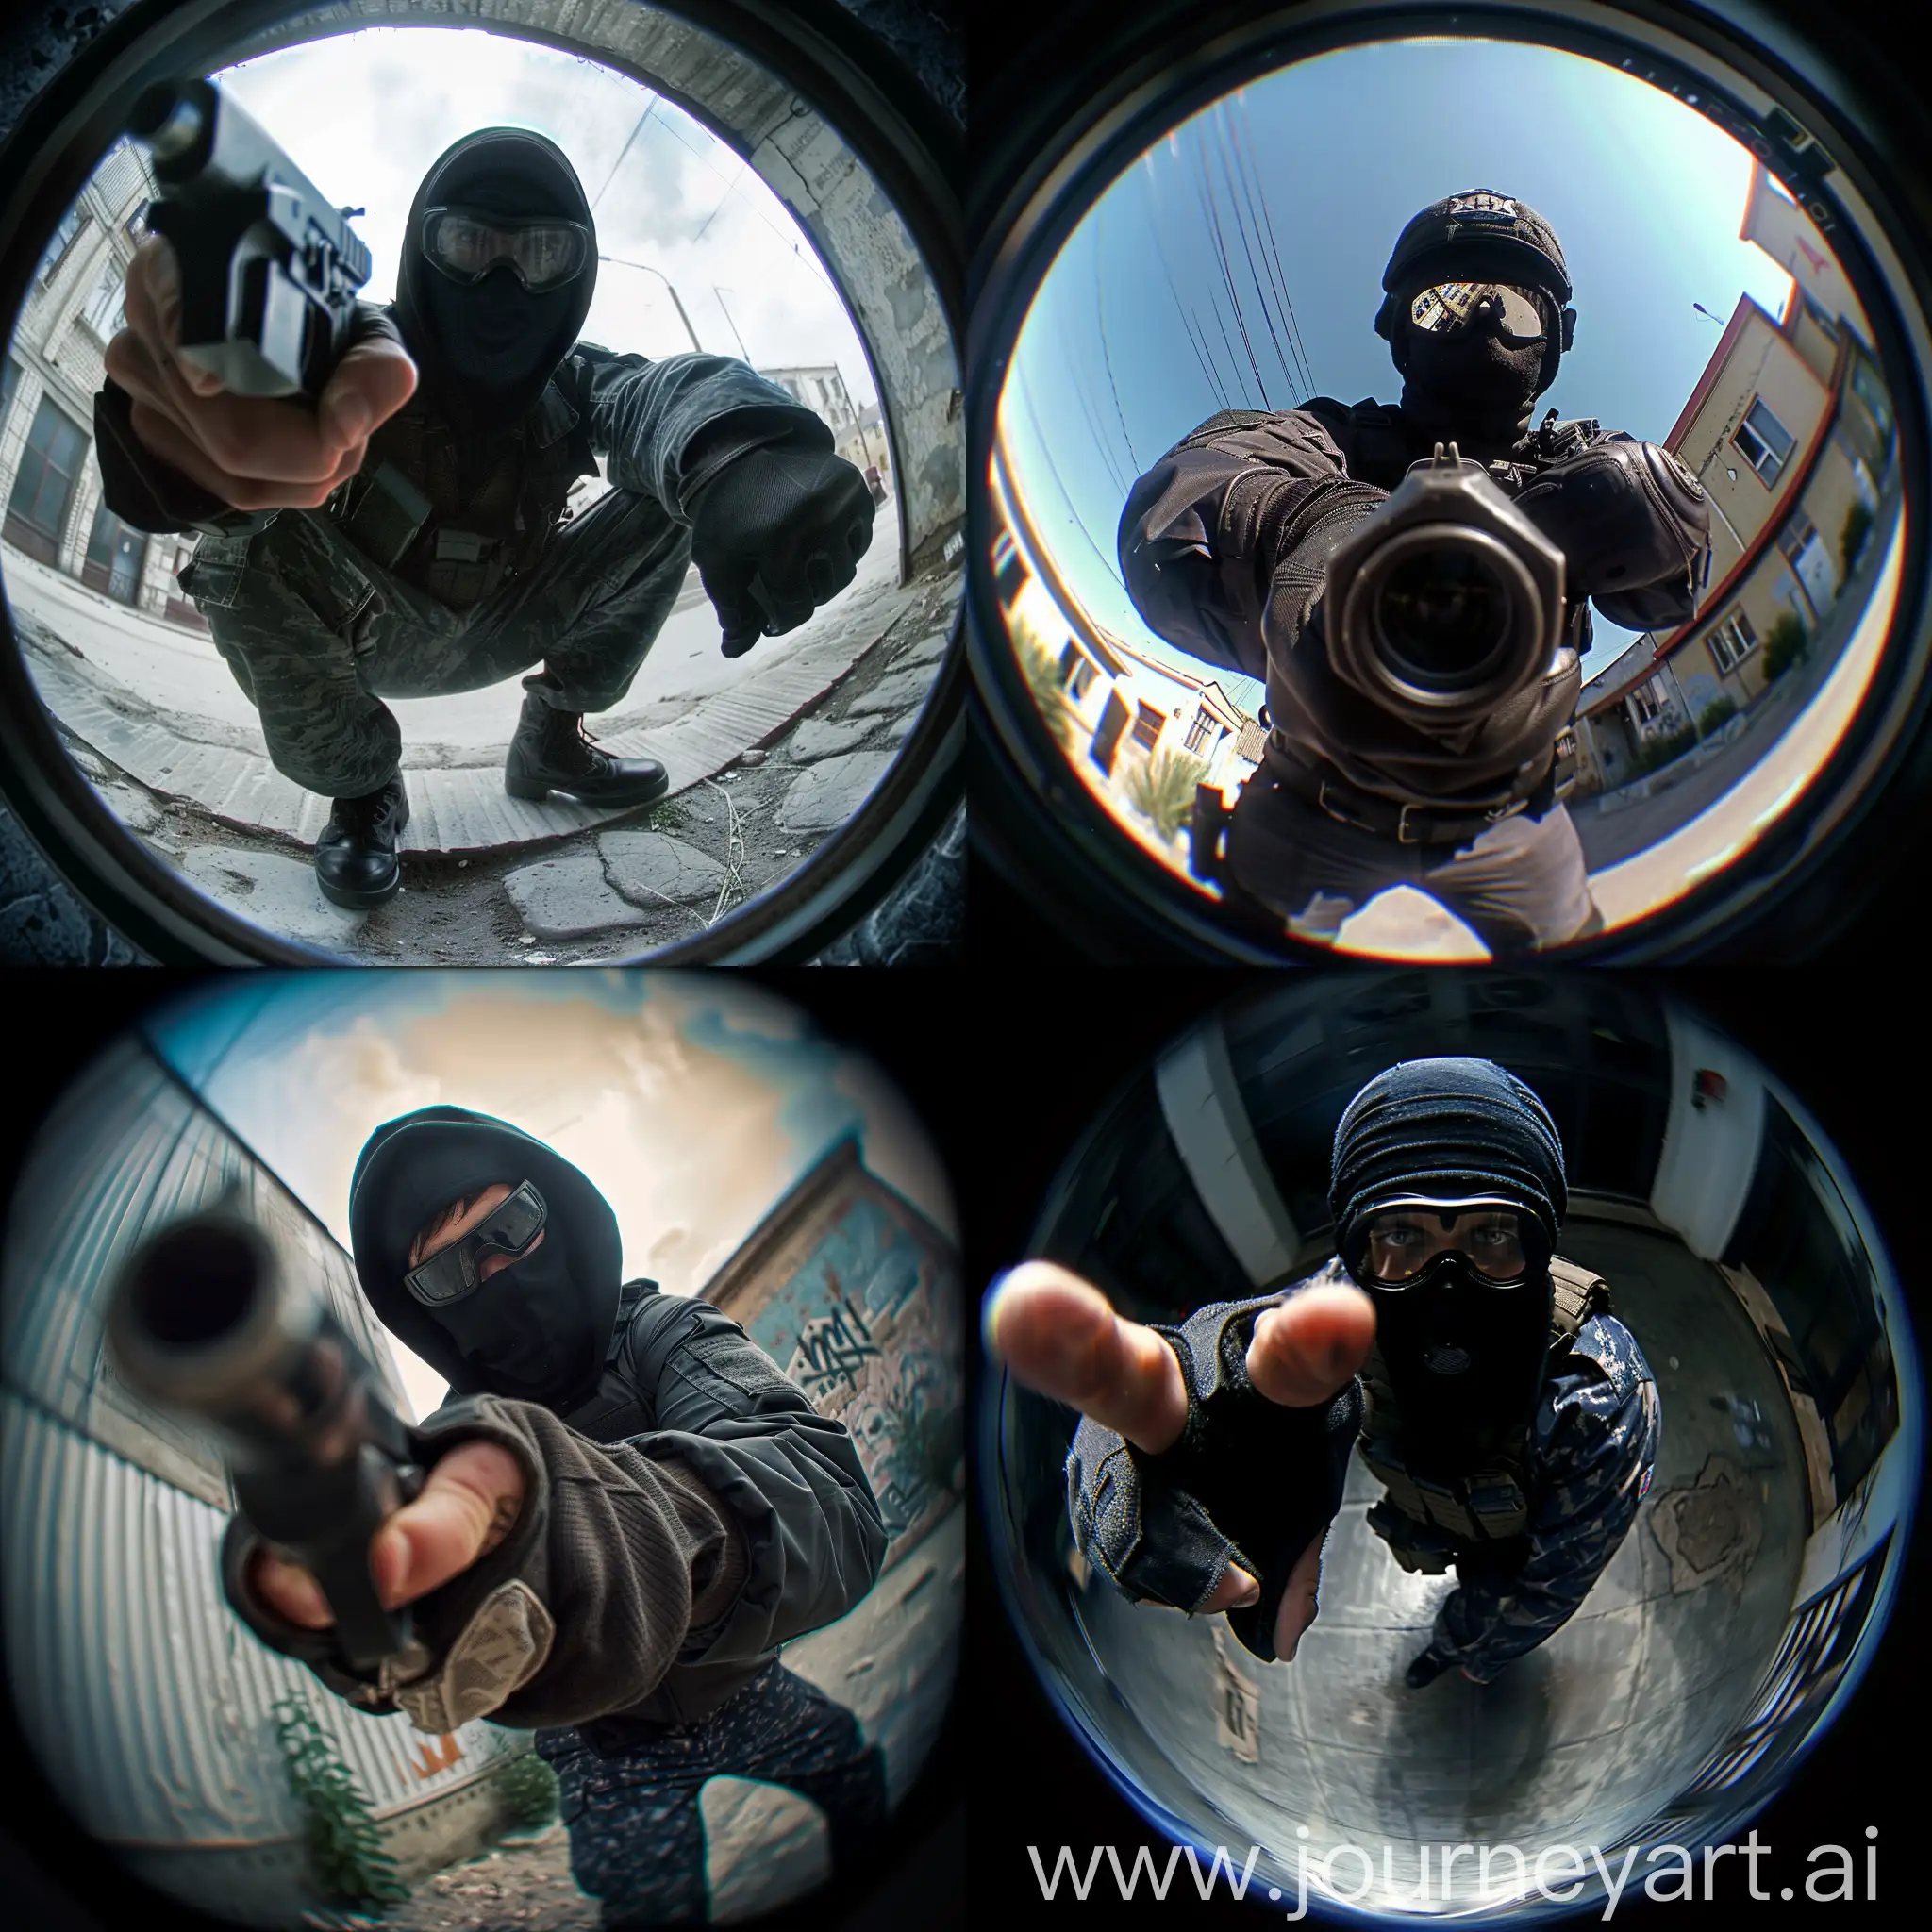 counter terrorist default agent from counter strike 2 doing a gangsta pose in fisheye lens